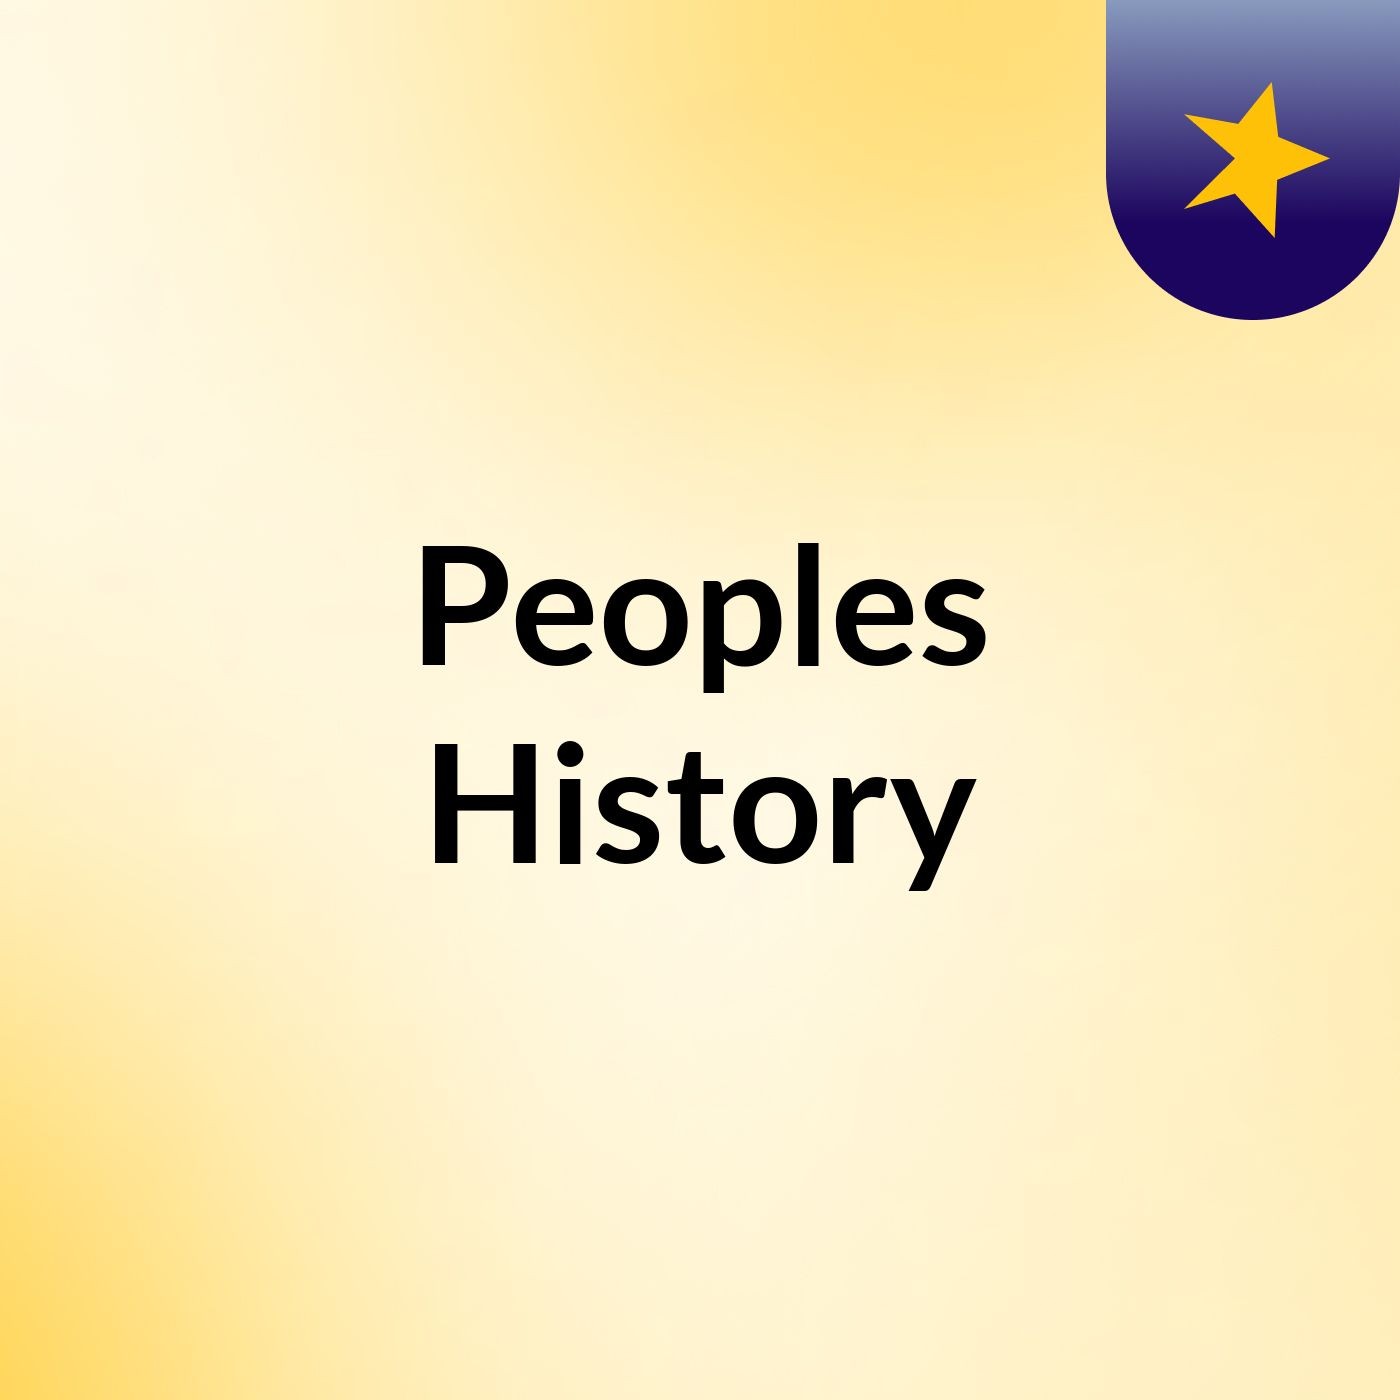 Peoples History